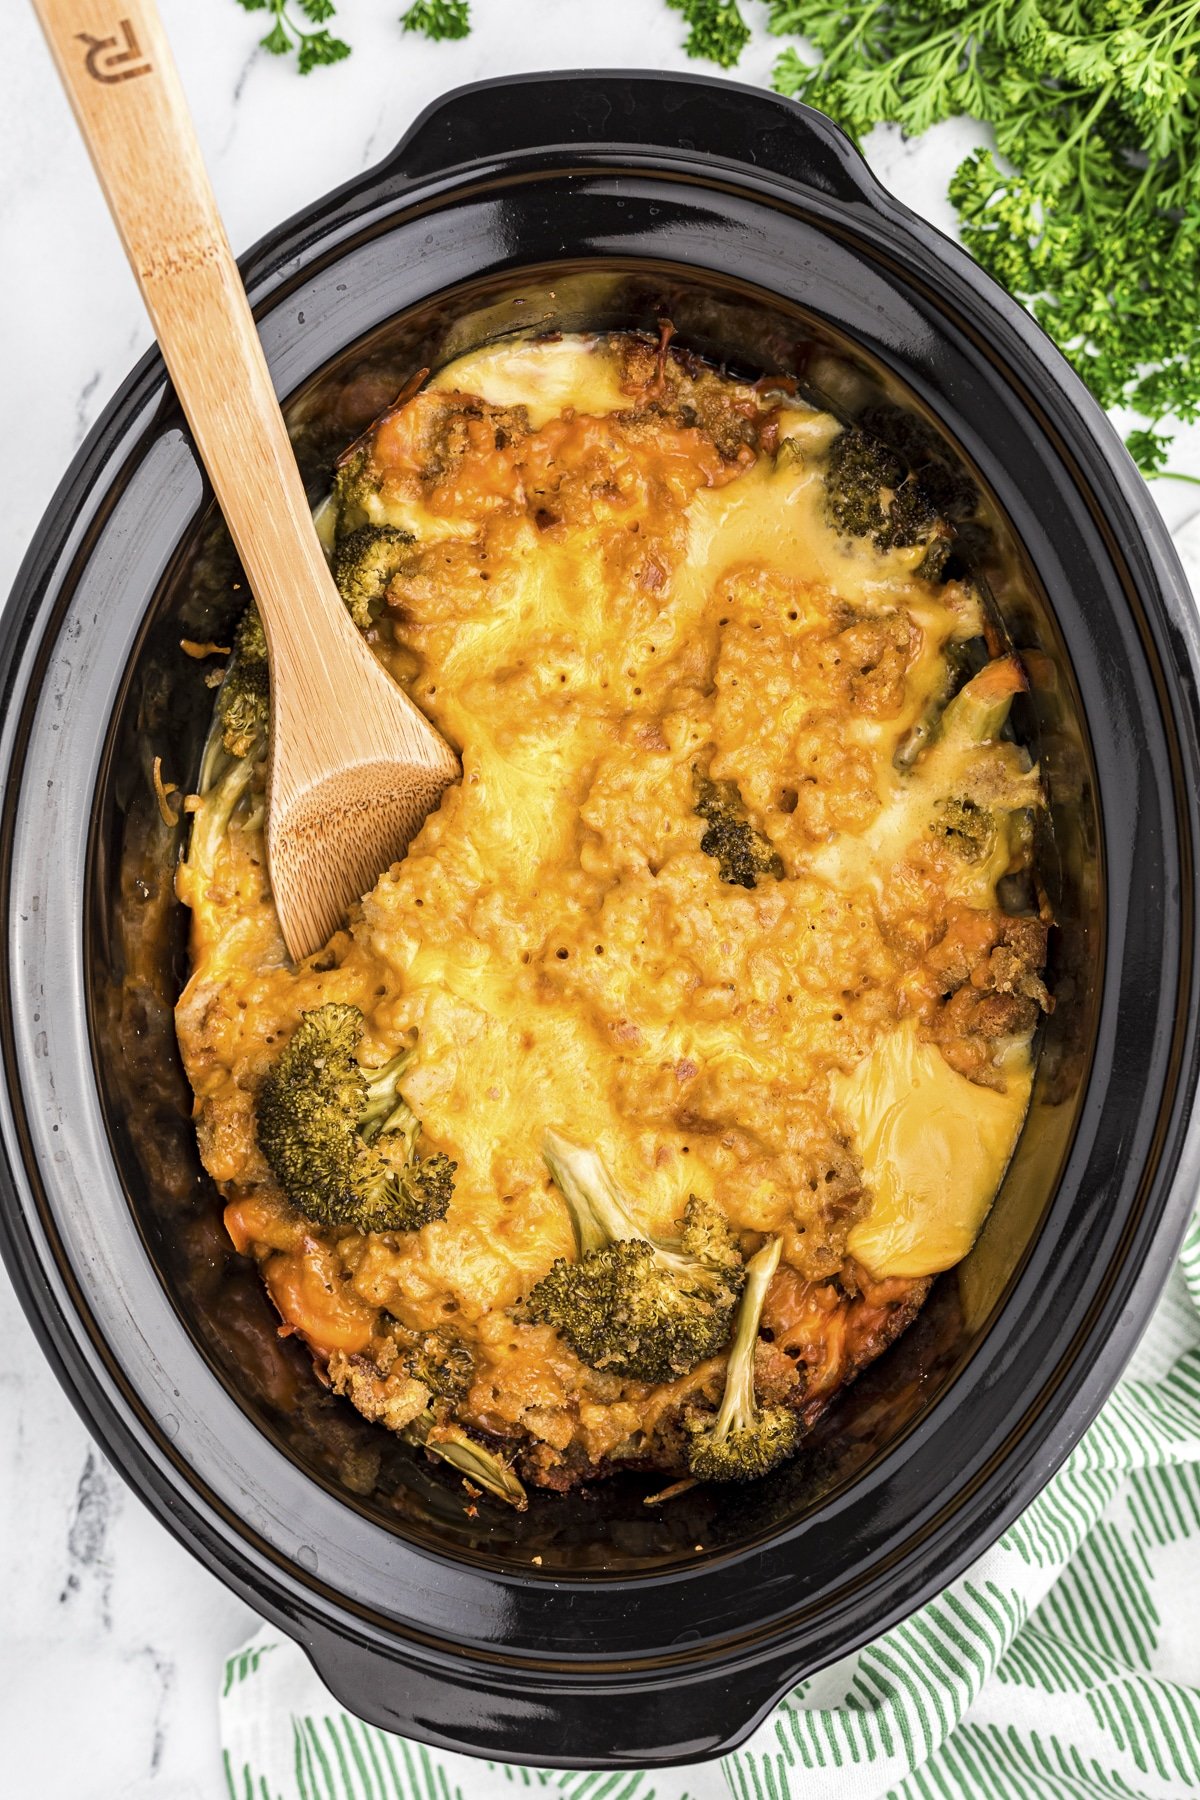 chicken broccoli stuffing casserole cooked in slow cooker.